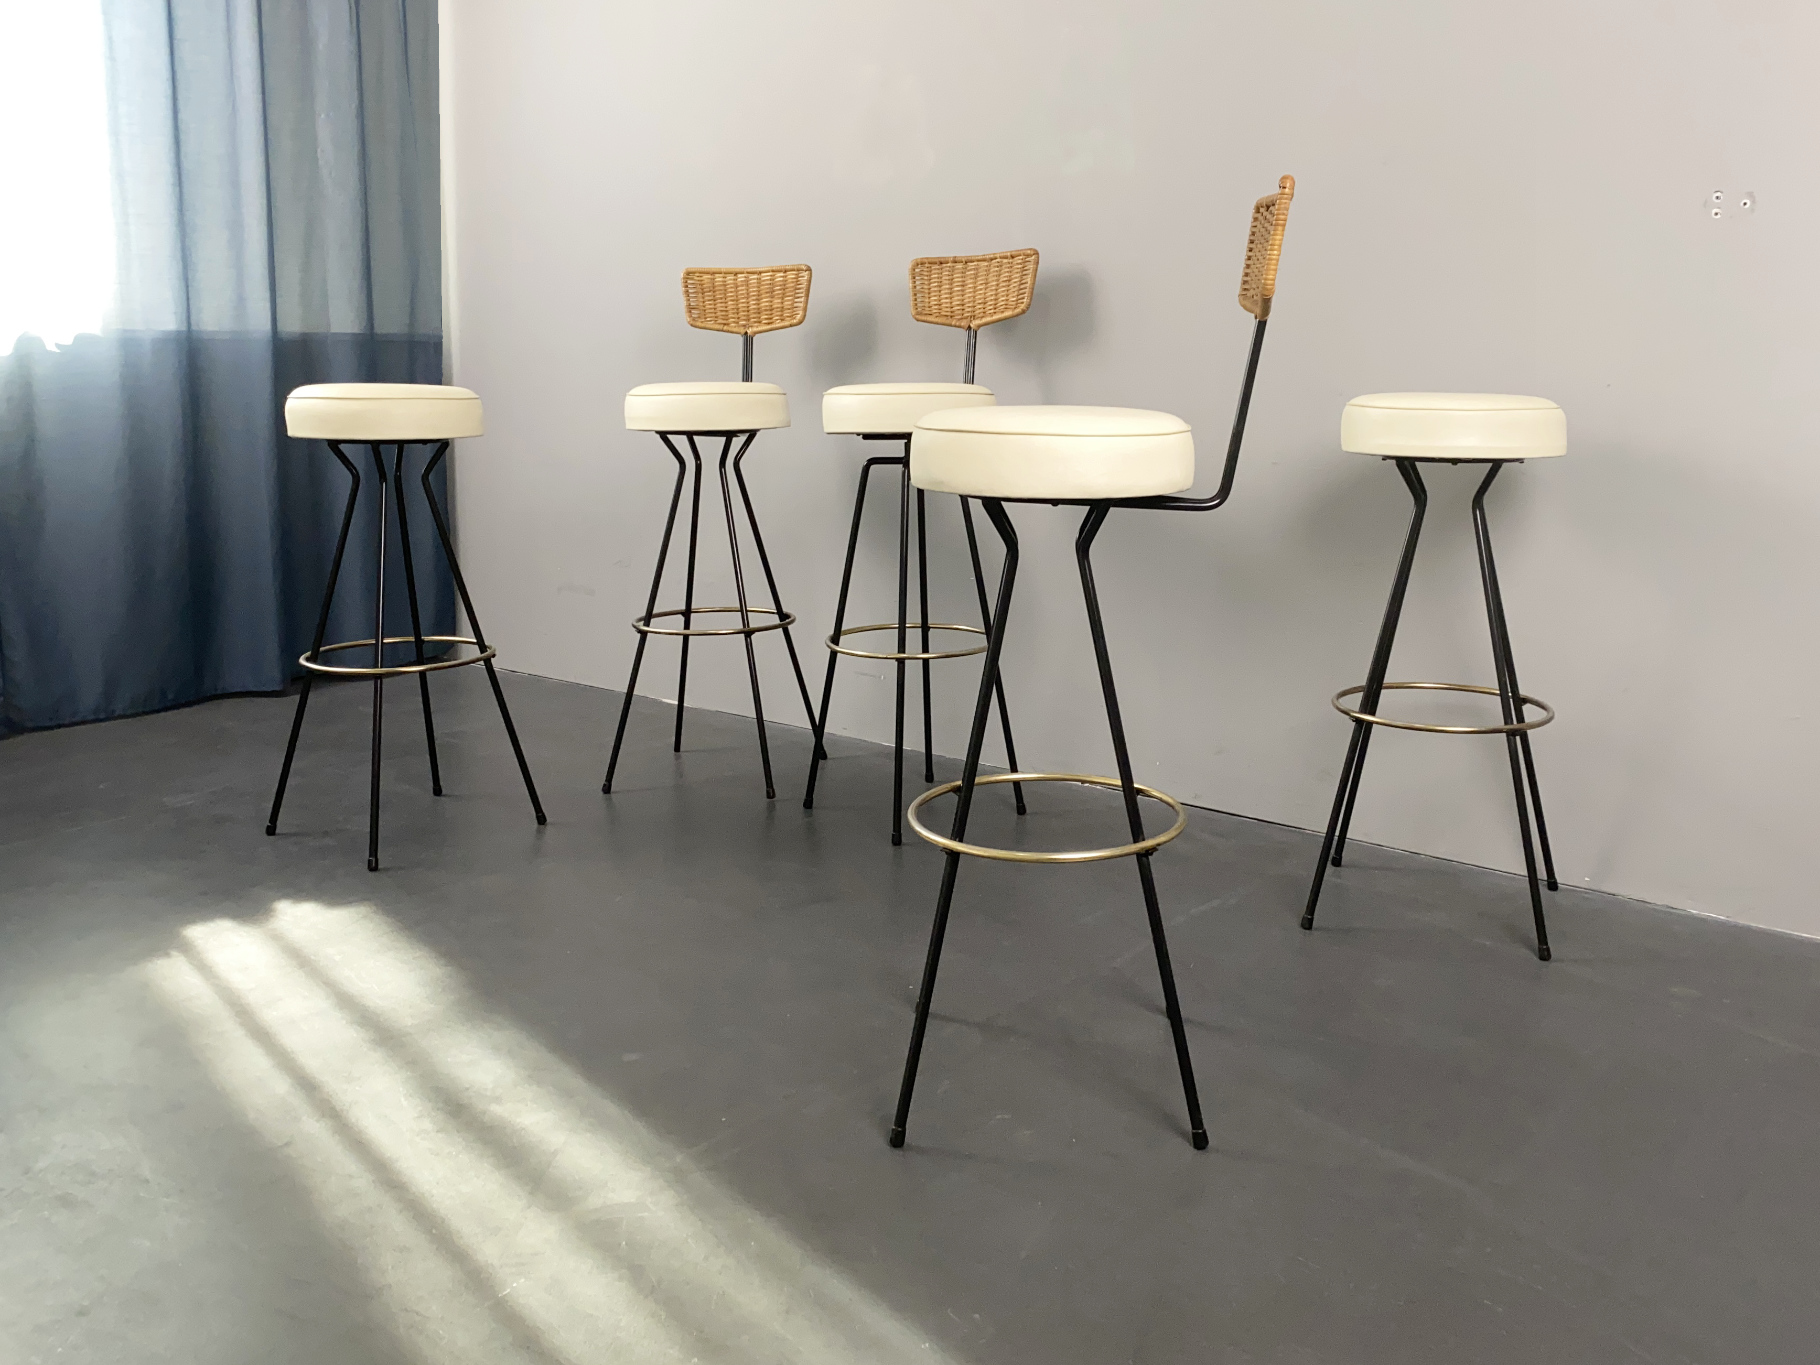 5 Bar Stools by Herta Maria Witzemann for Erwin Behr 1950s